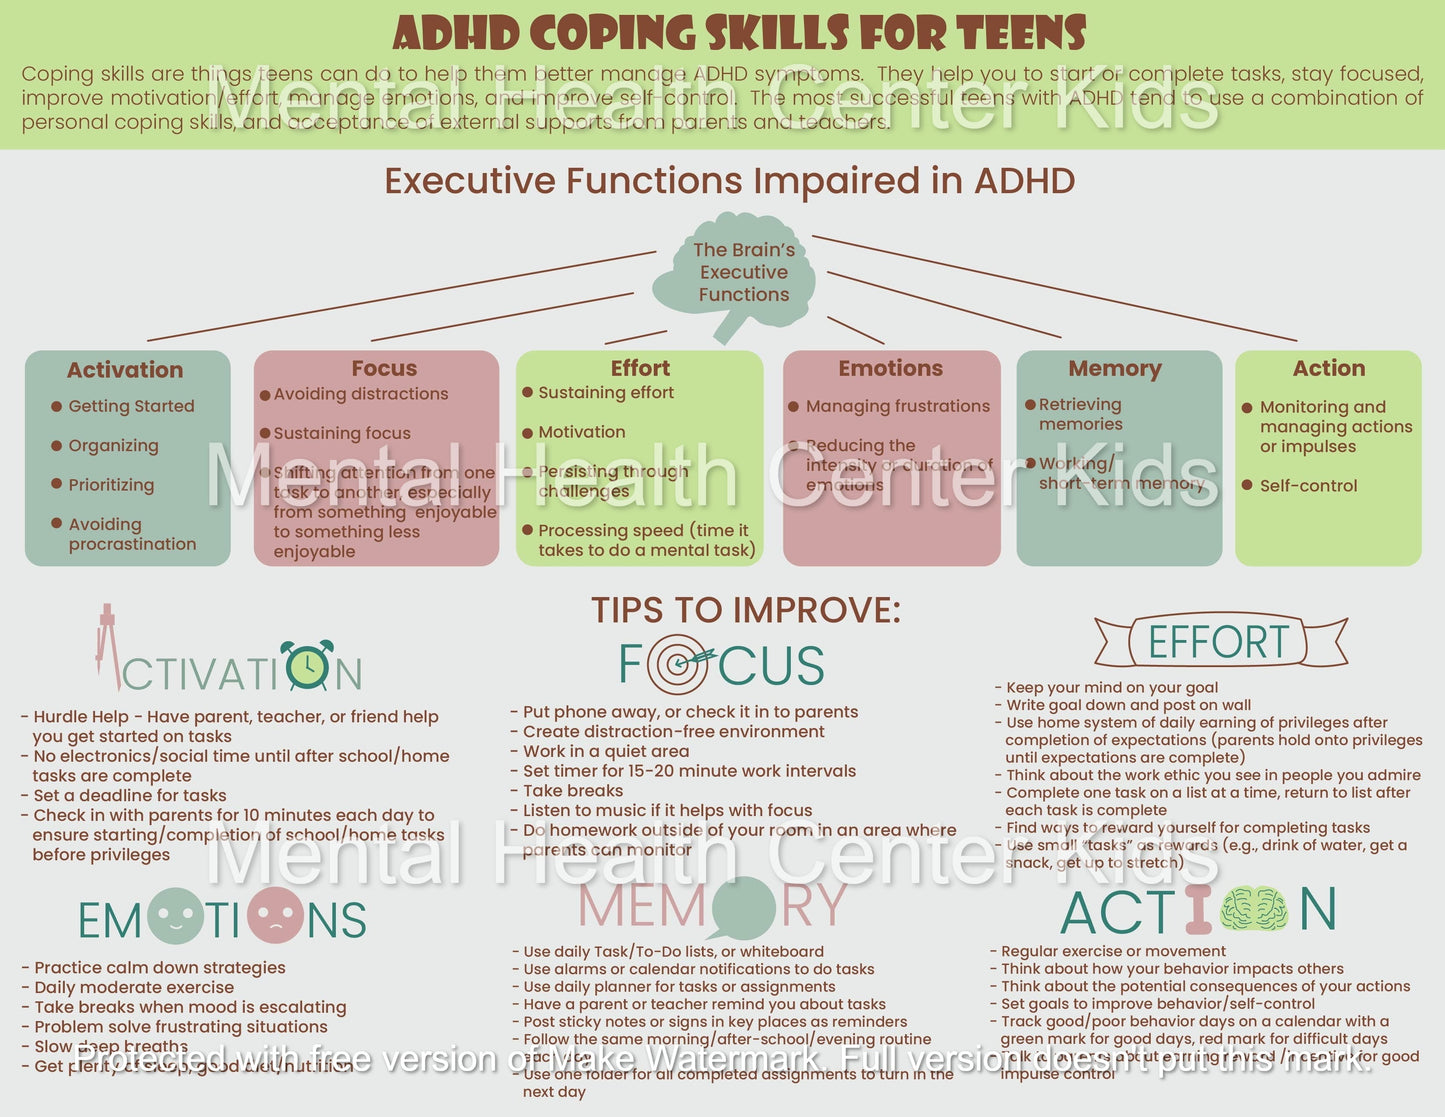 ADHD Coping Skills For Teens Landscape-Final